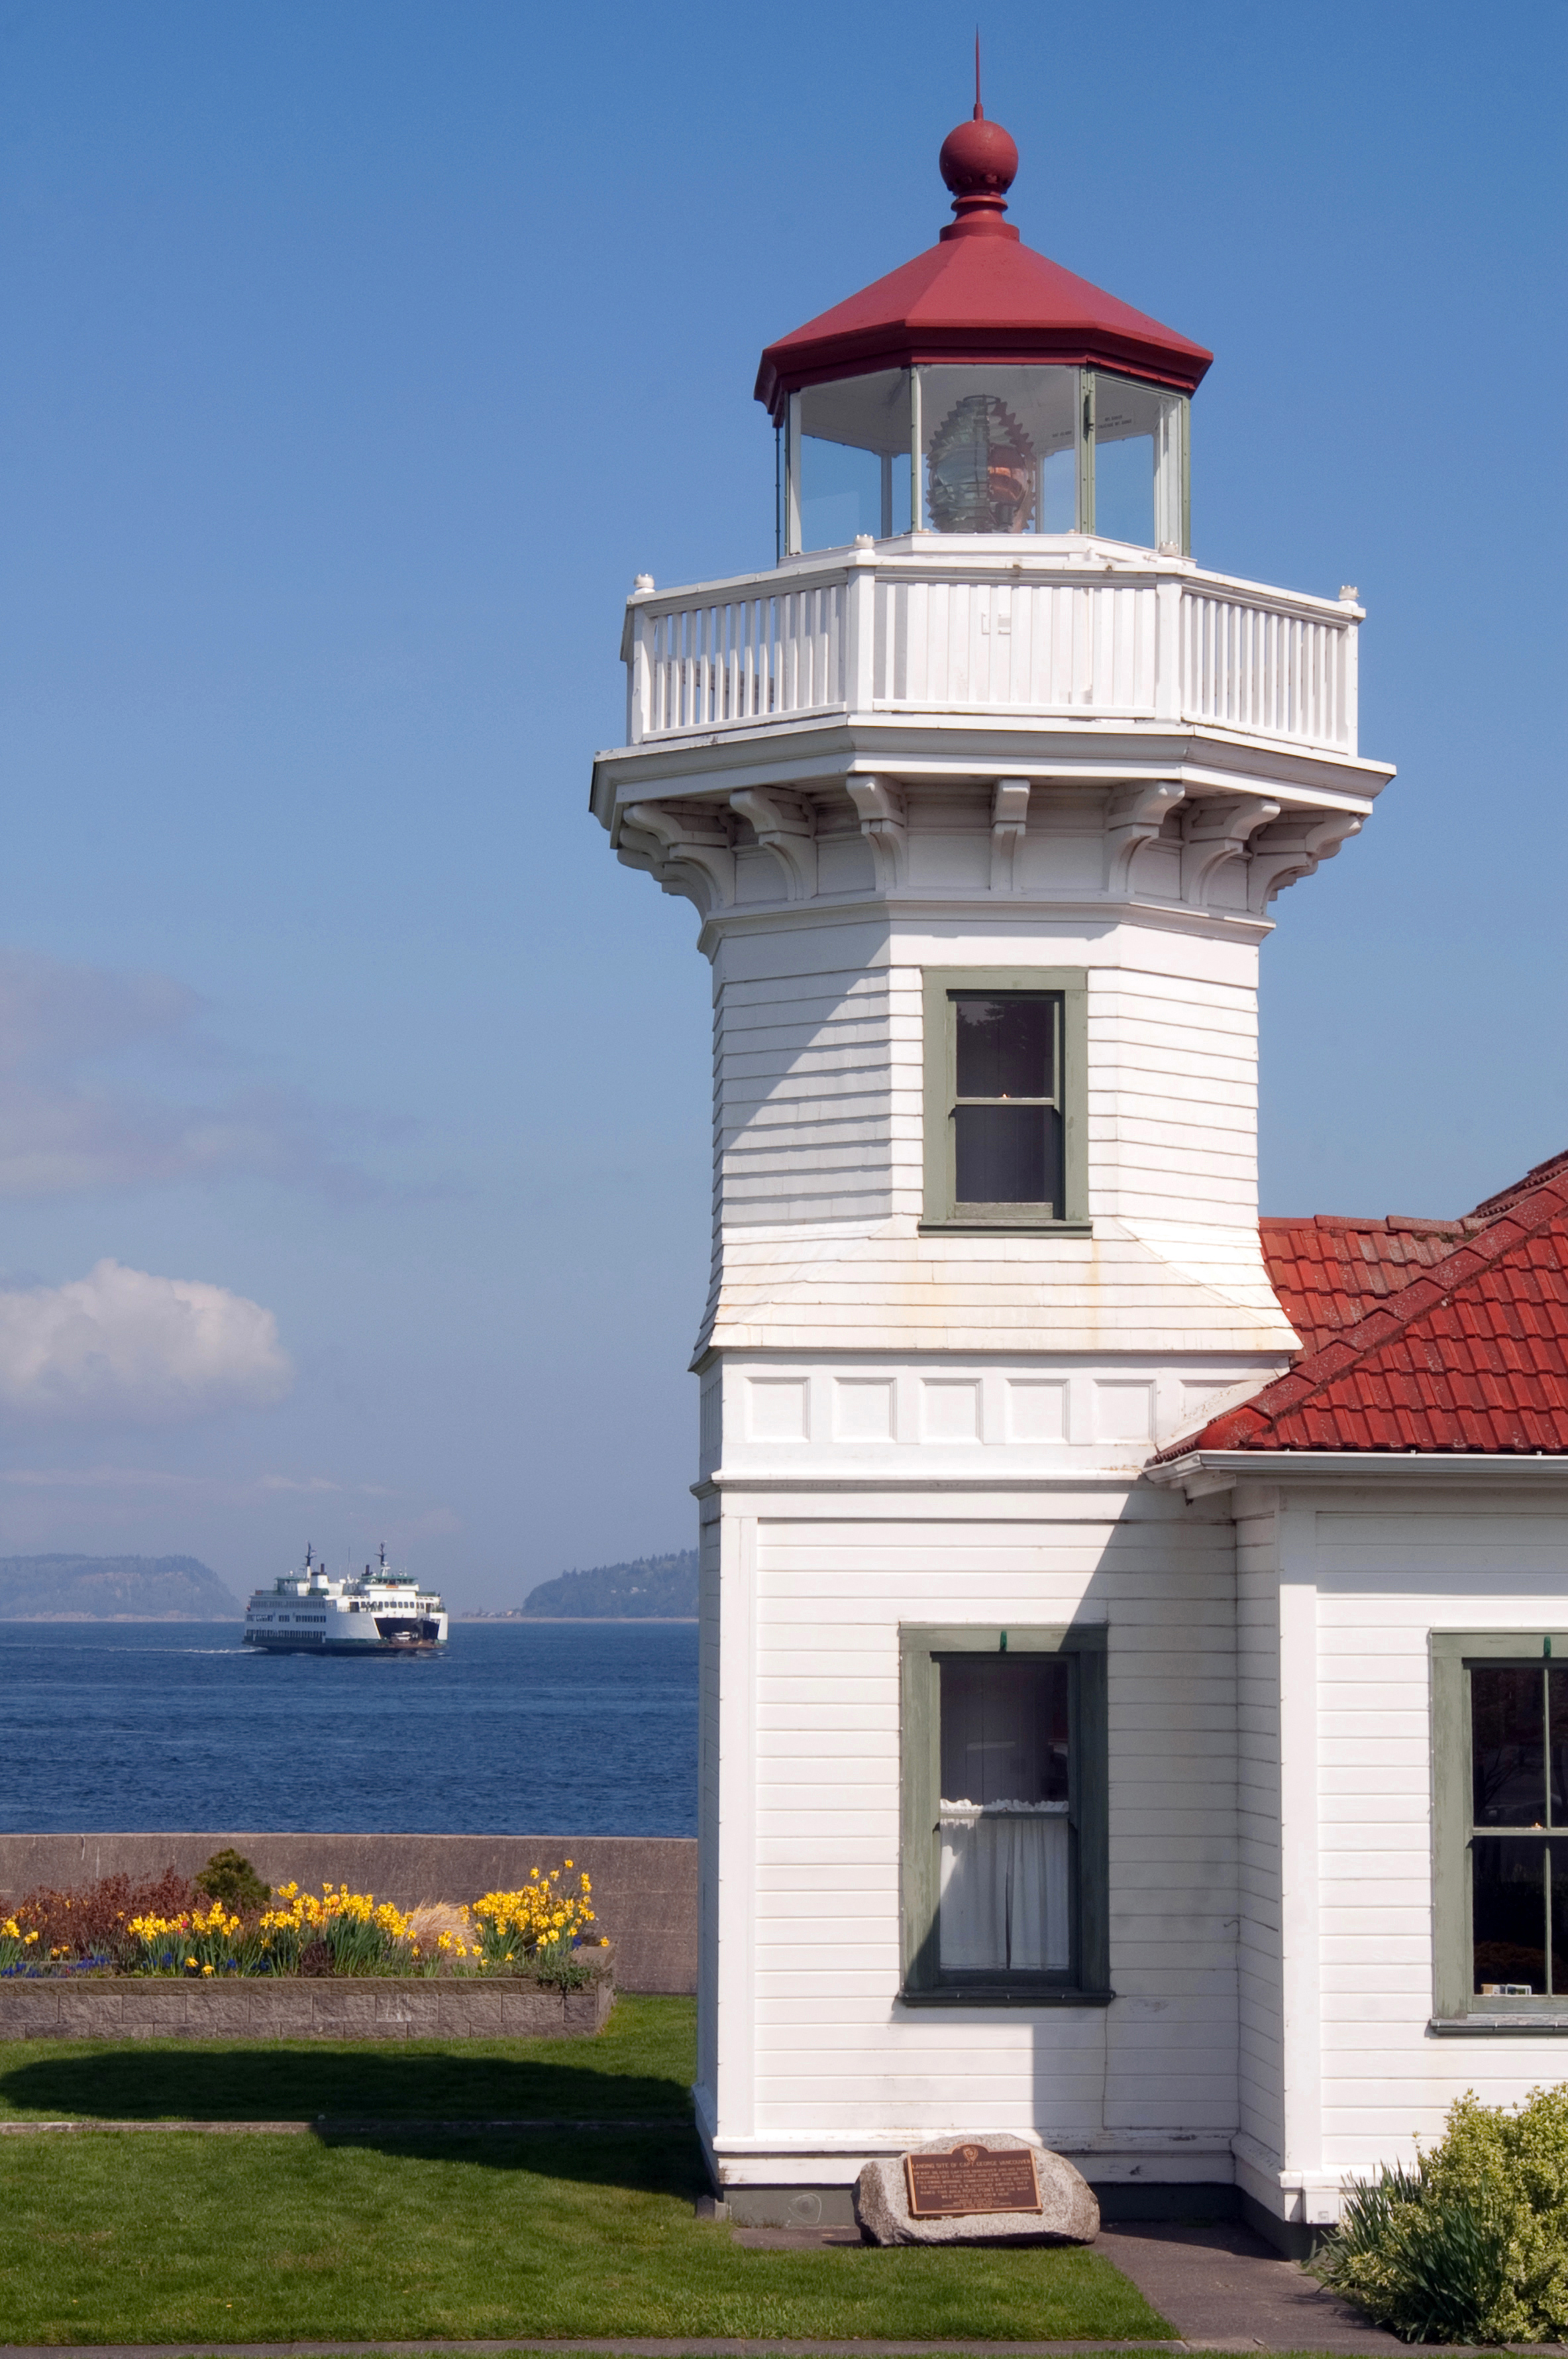 Lighthouse in Puget Sound